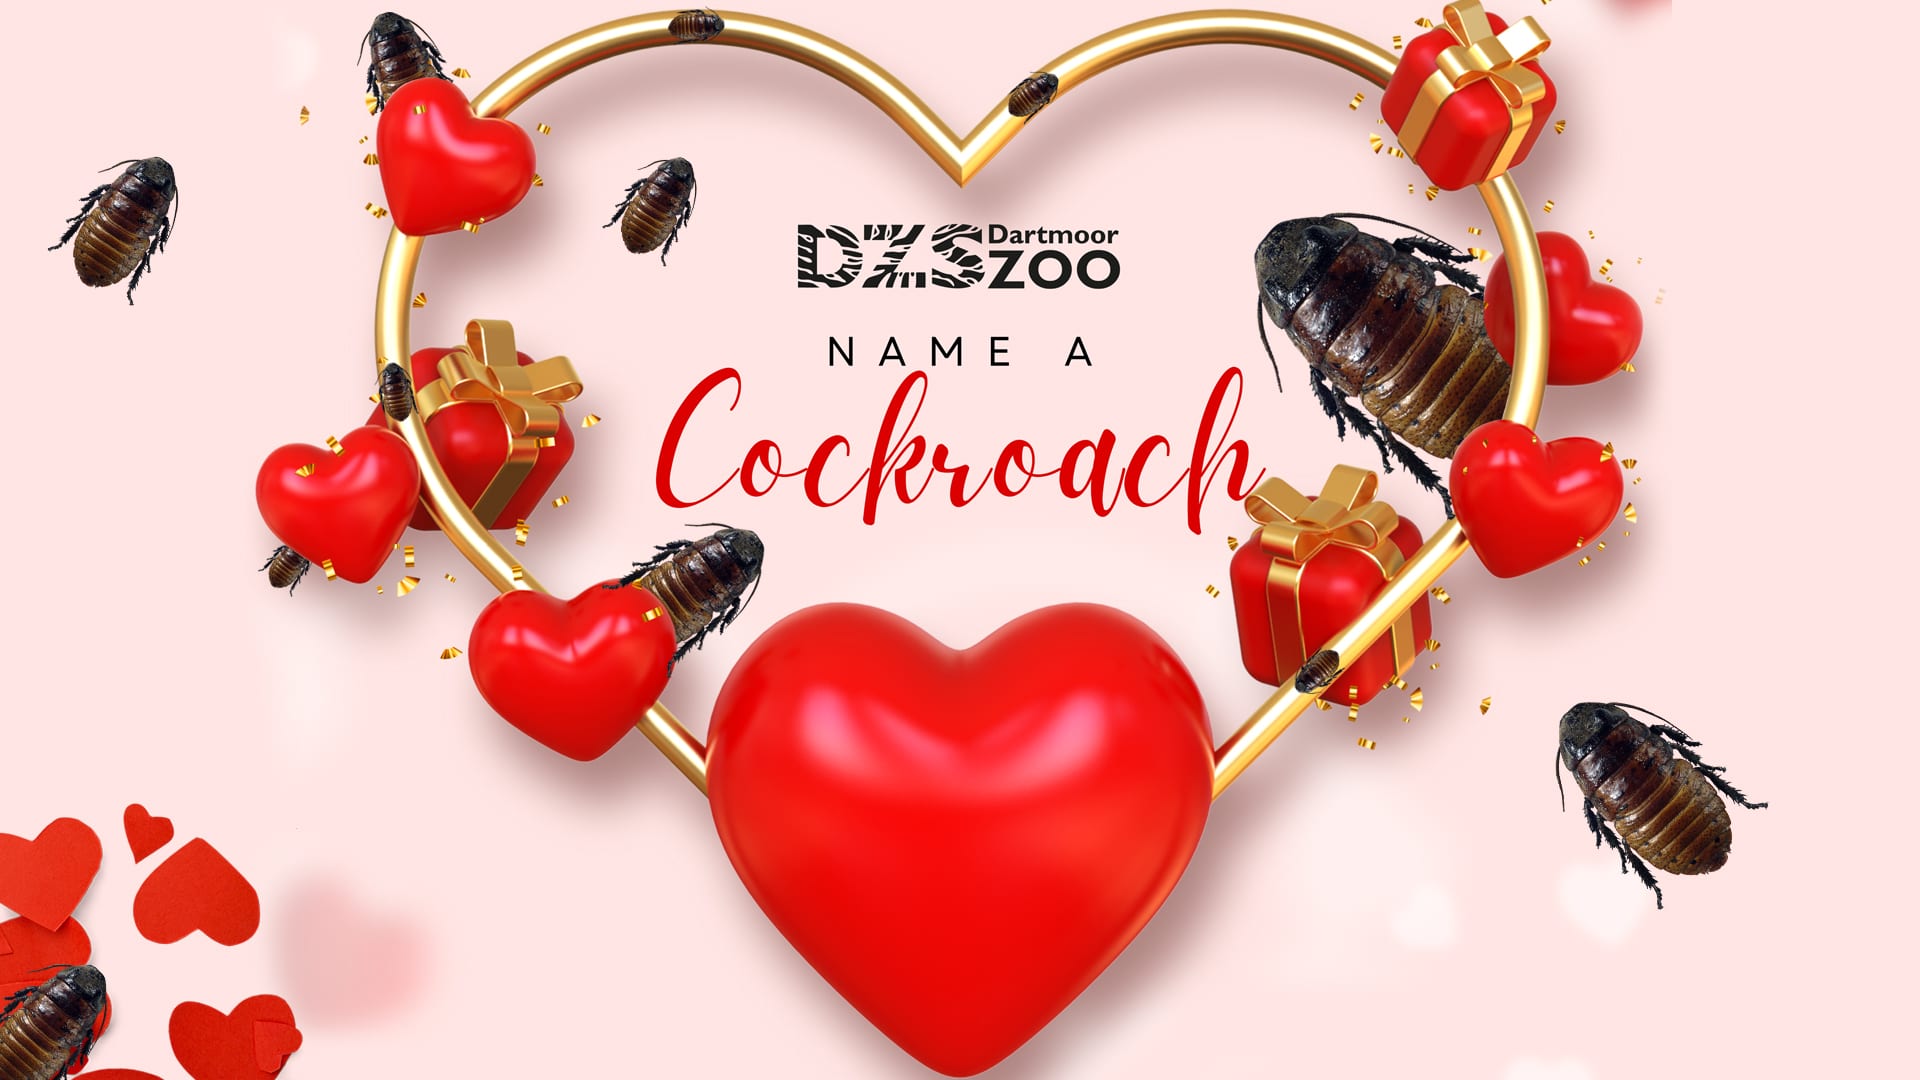 Celebrate Valentine’s Day by naming a cockroach!